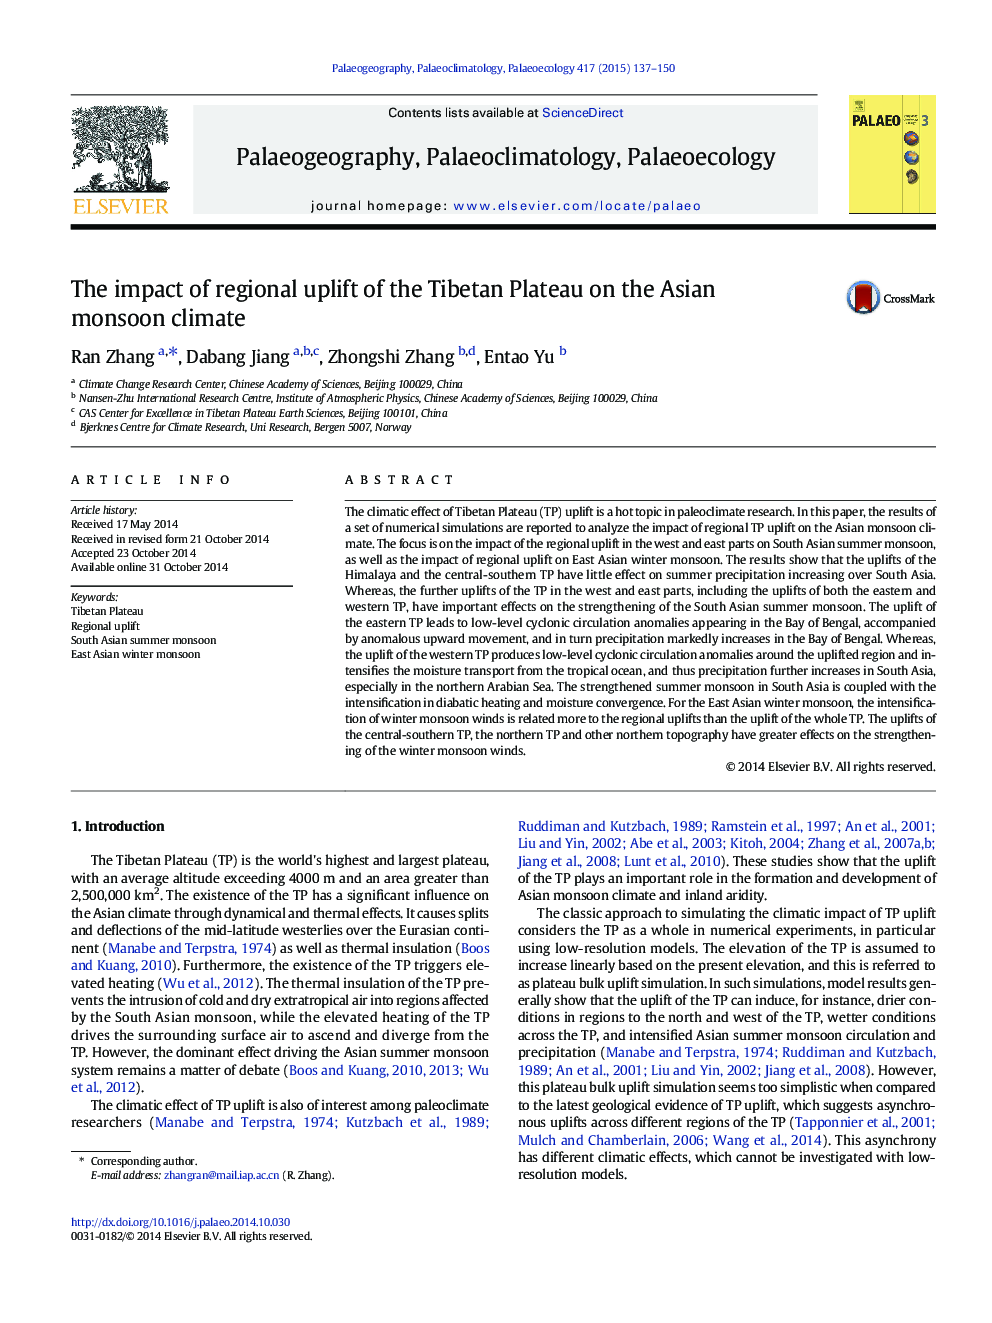 The impact of regional uplift of the Tibetan Plateau on the Asian monsoon climate